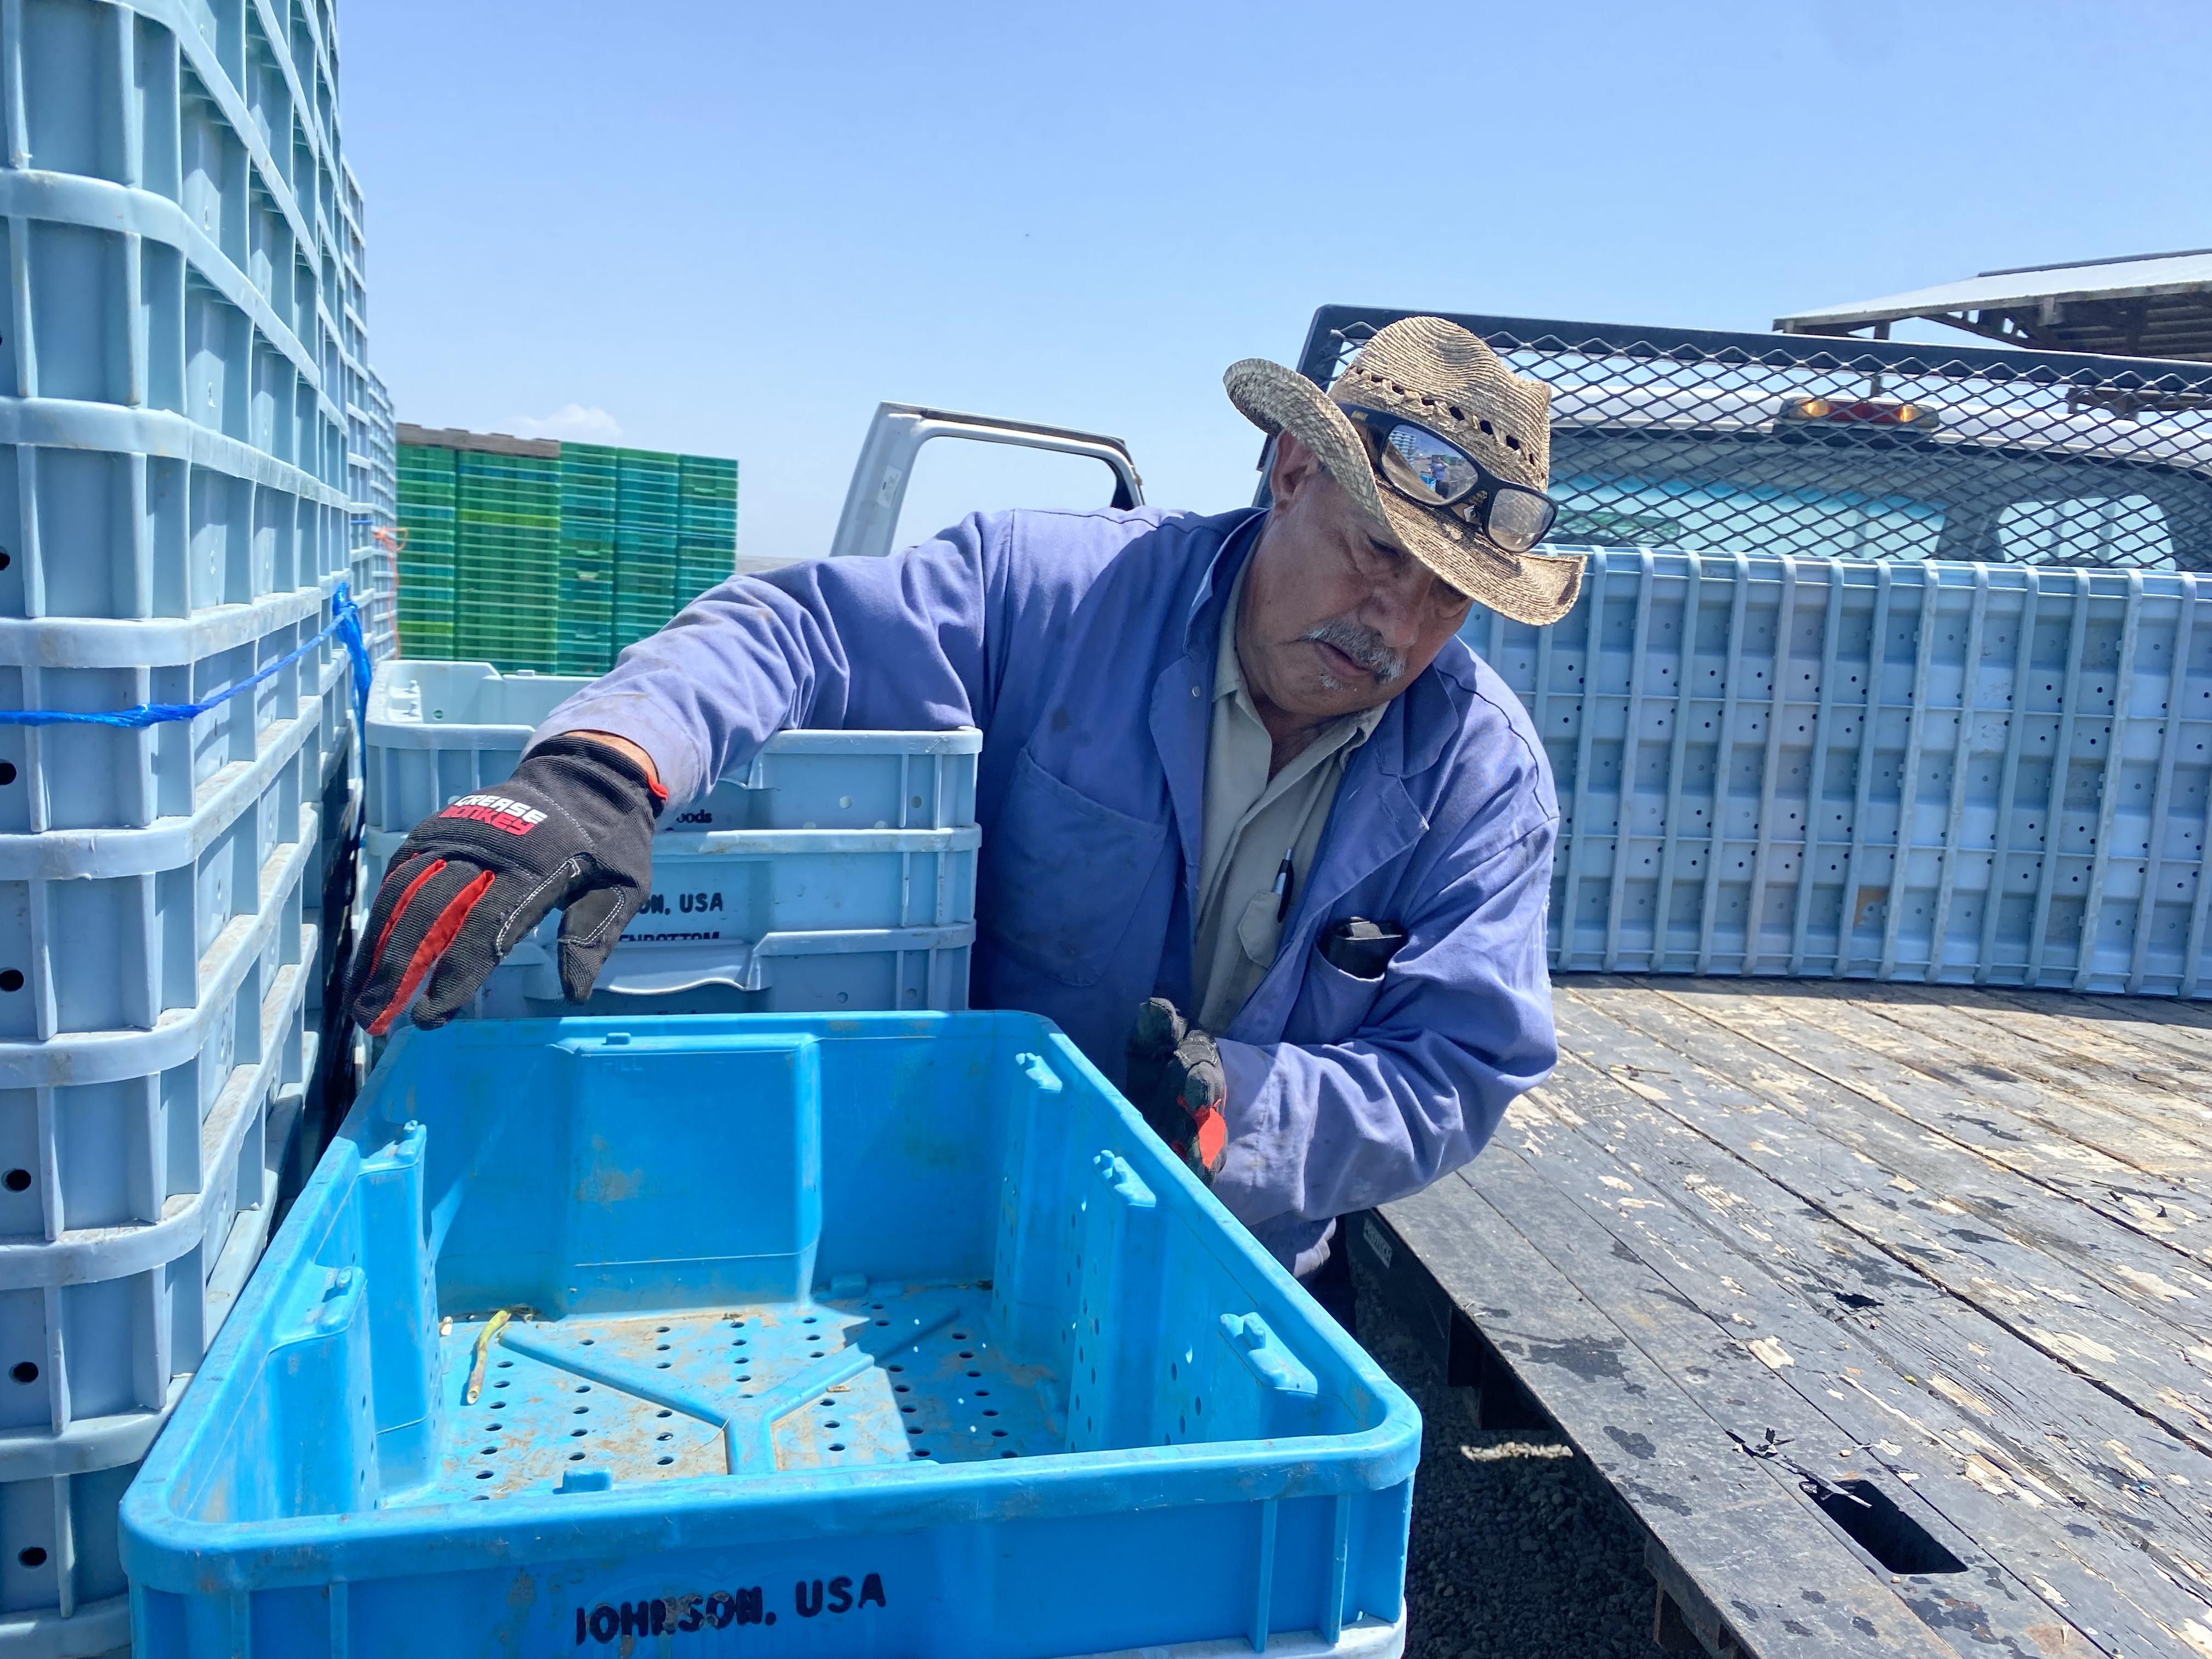 Celestino Mendoza, 68, of Kennewick, says it’s been a lot of work to harvest a giant push of asparagus with the record-warm spring weather across much of the Northwest